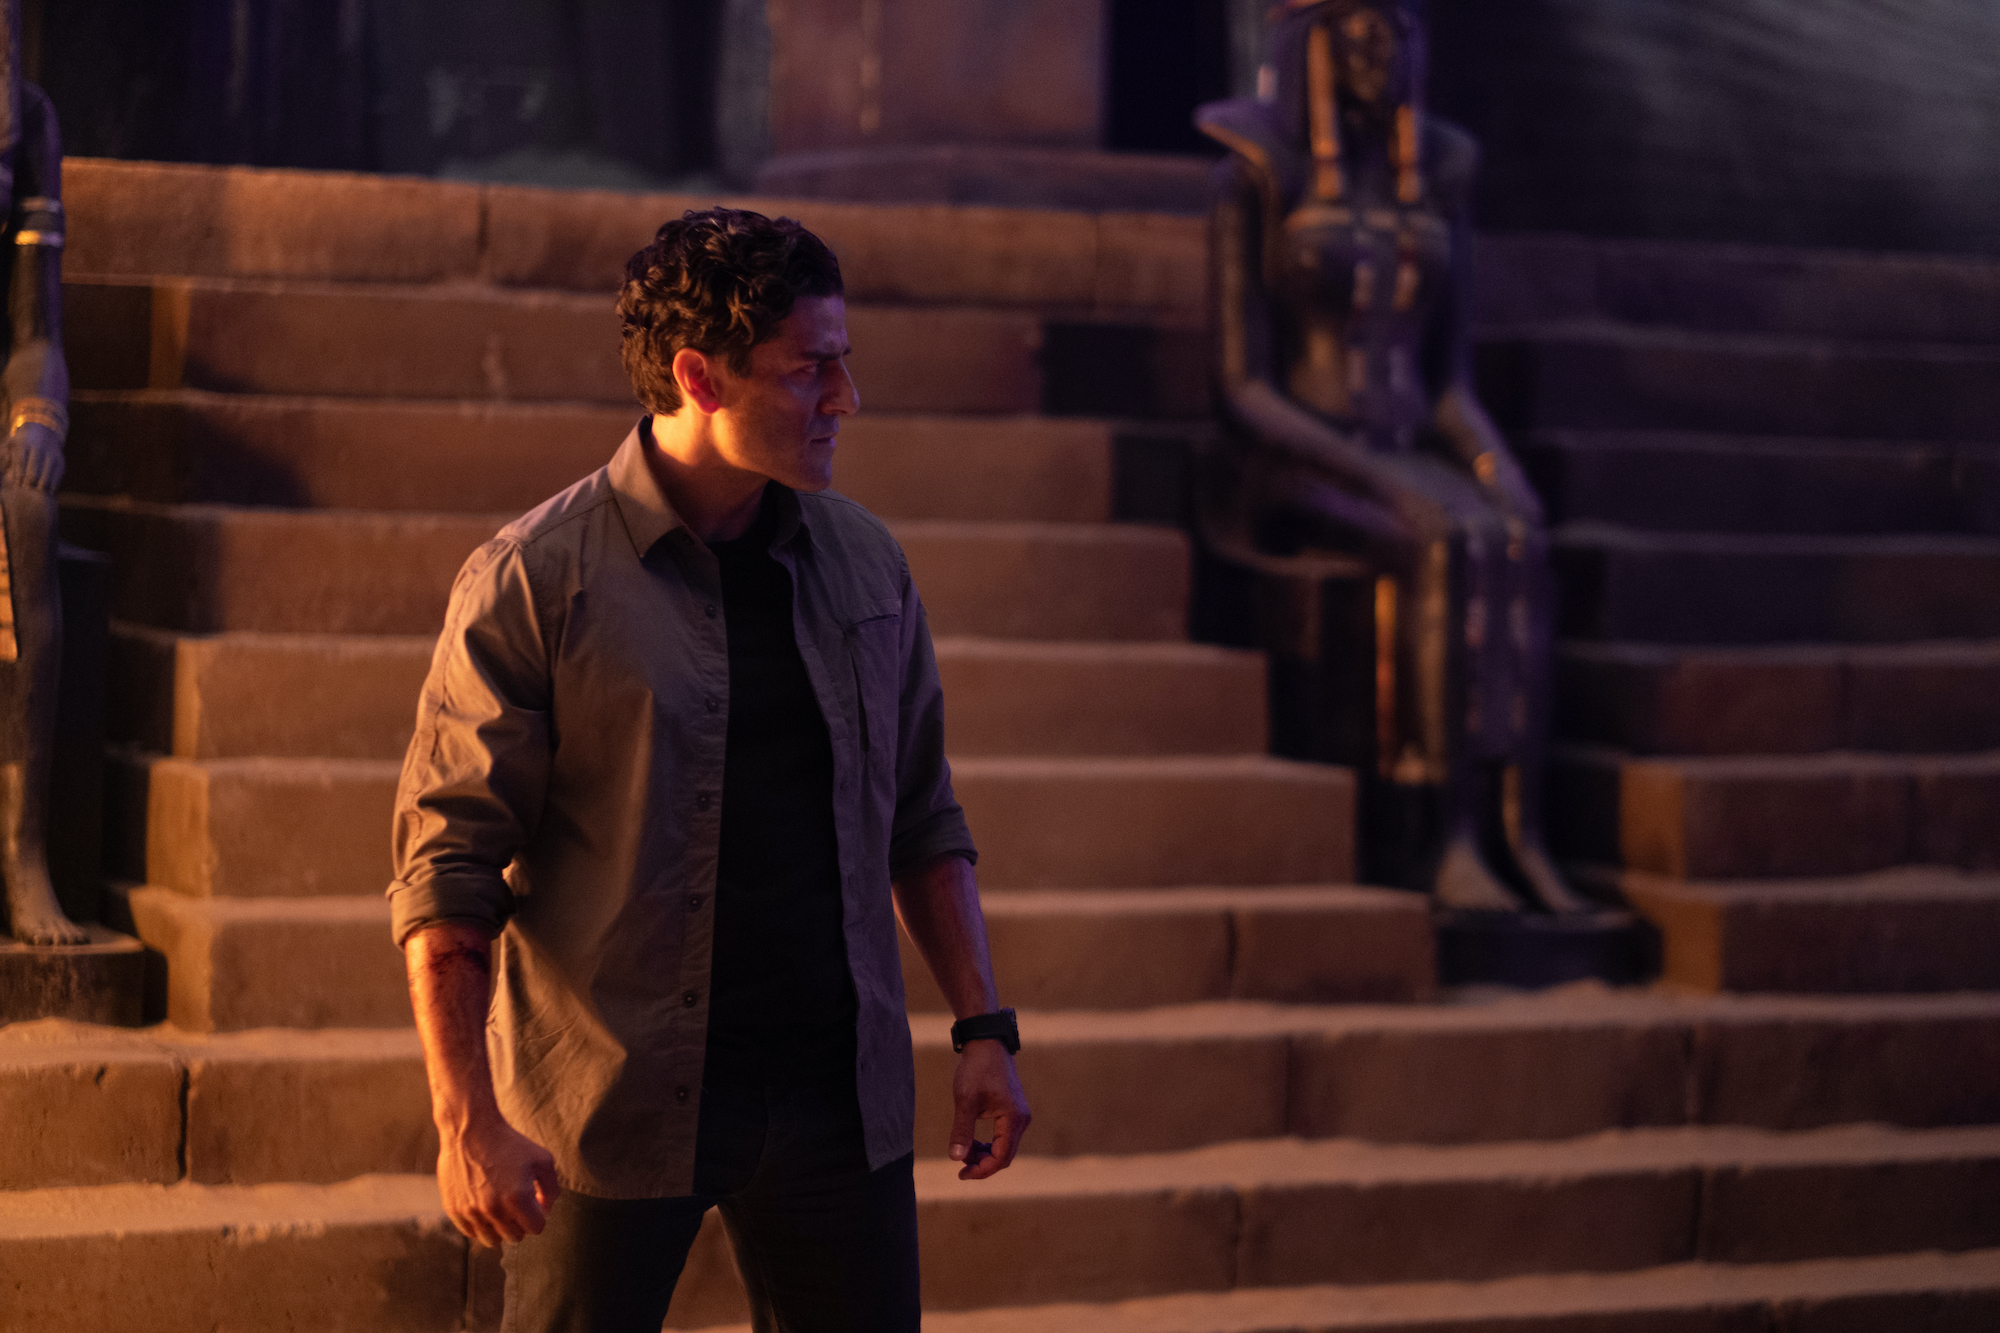 Oscar Isaac as Marc Spector/Steven Grant stands in the middle of a tomb in the Disney Plus series Moon Knight.